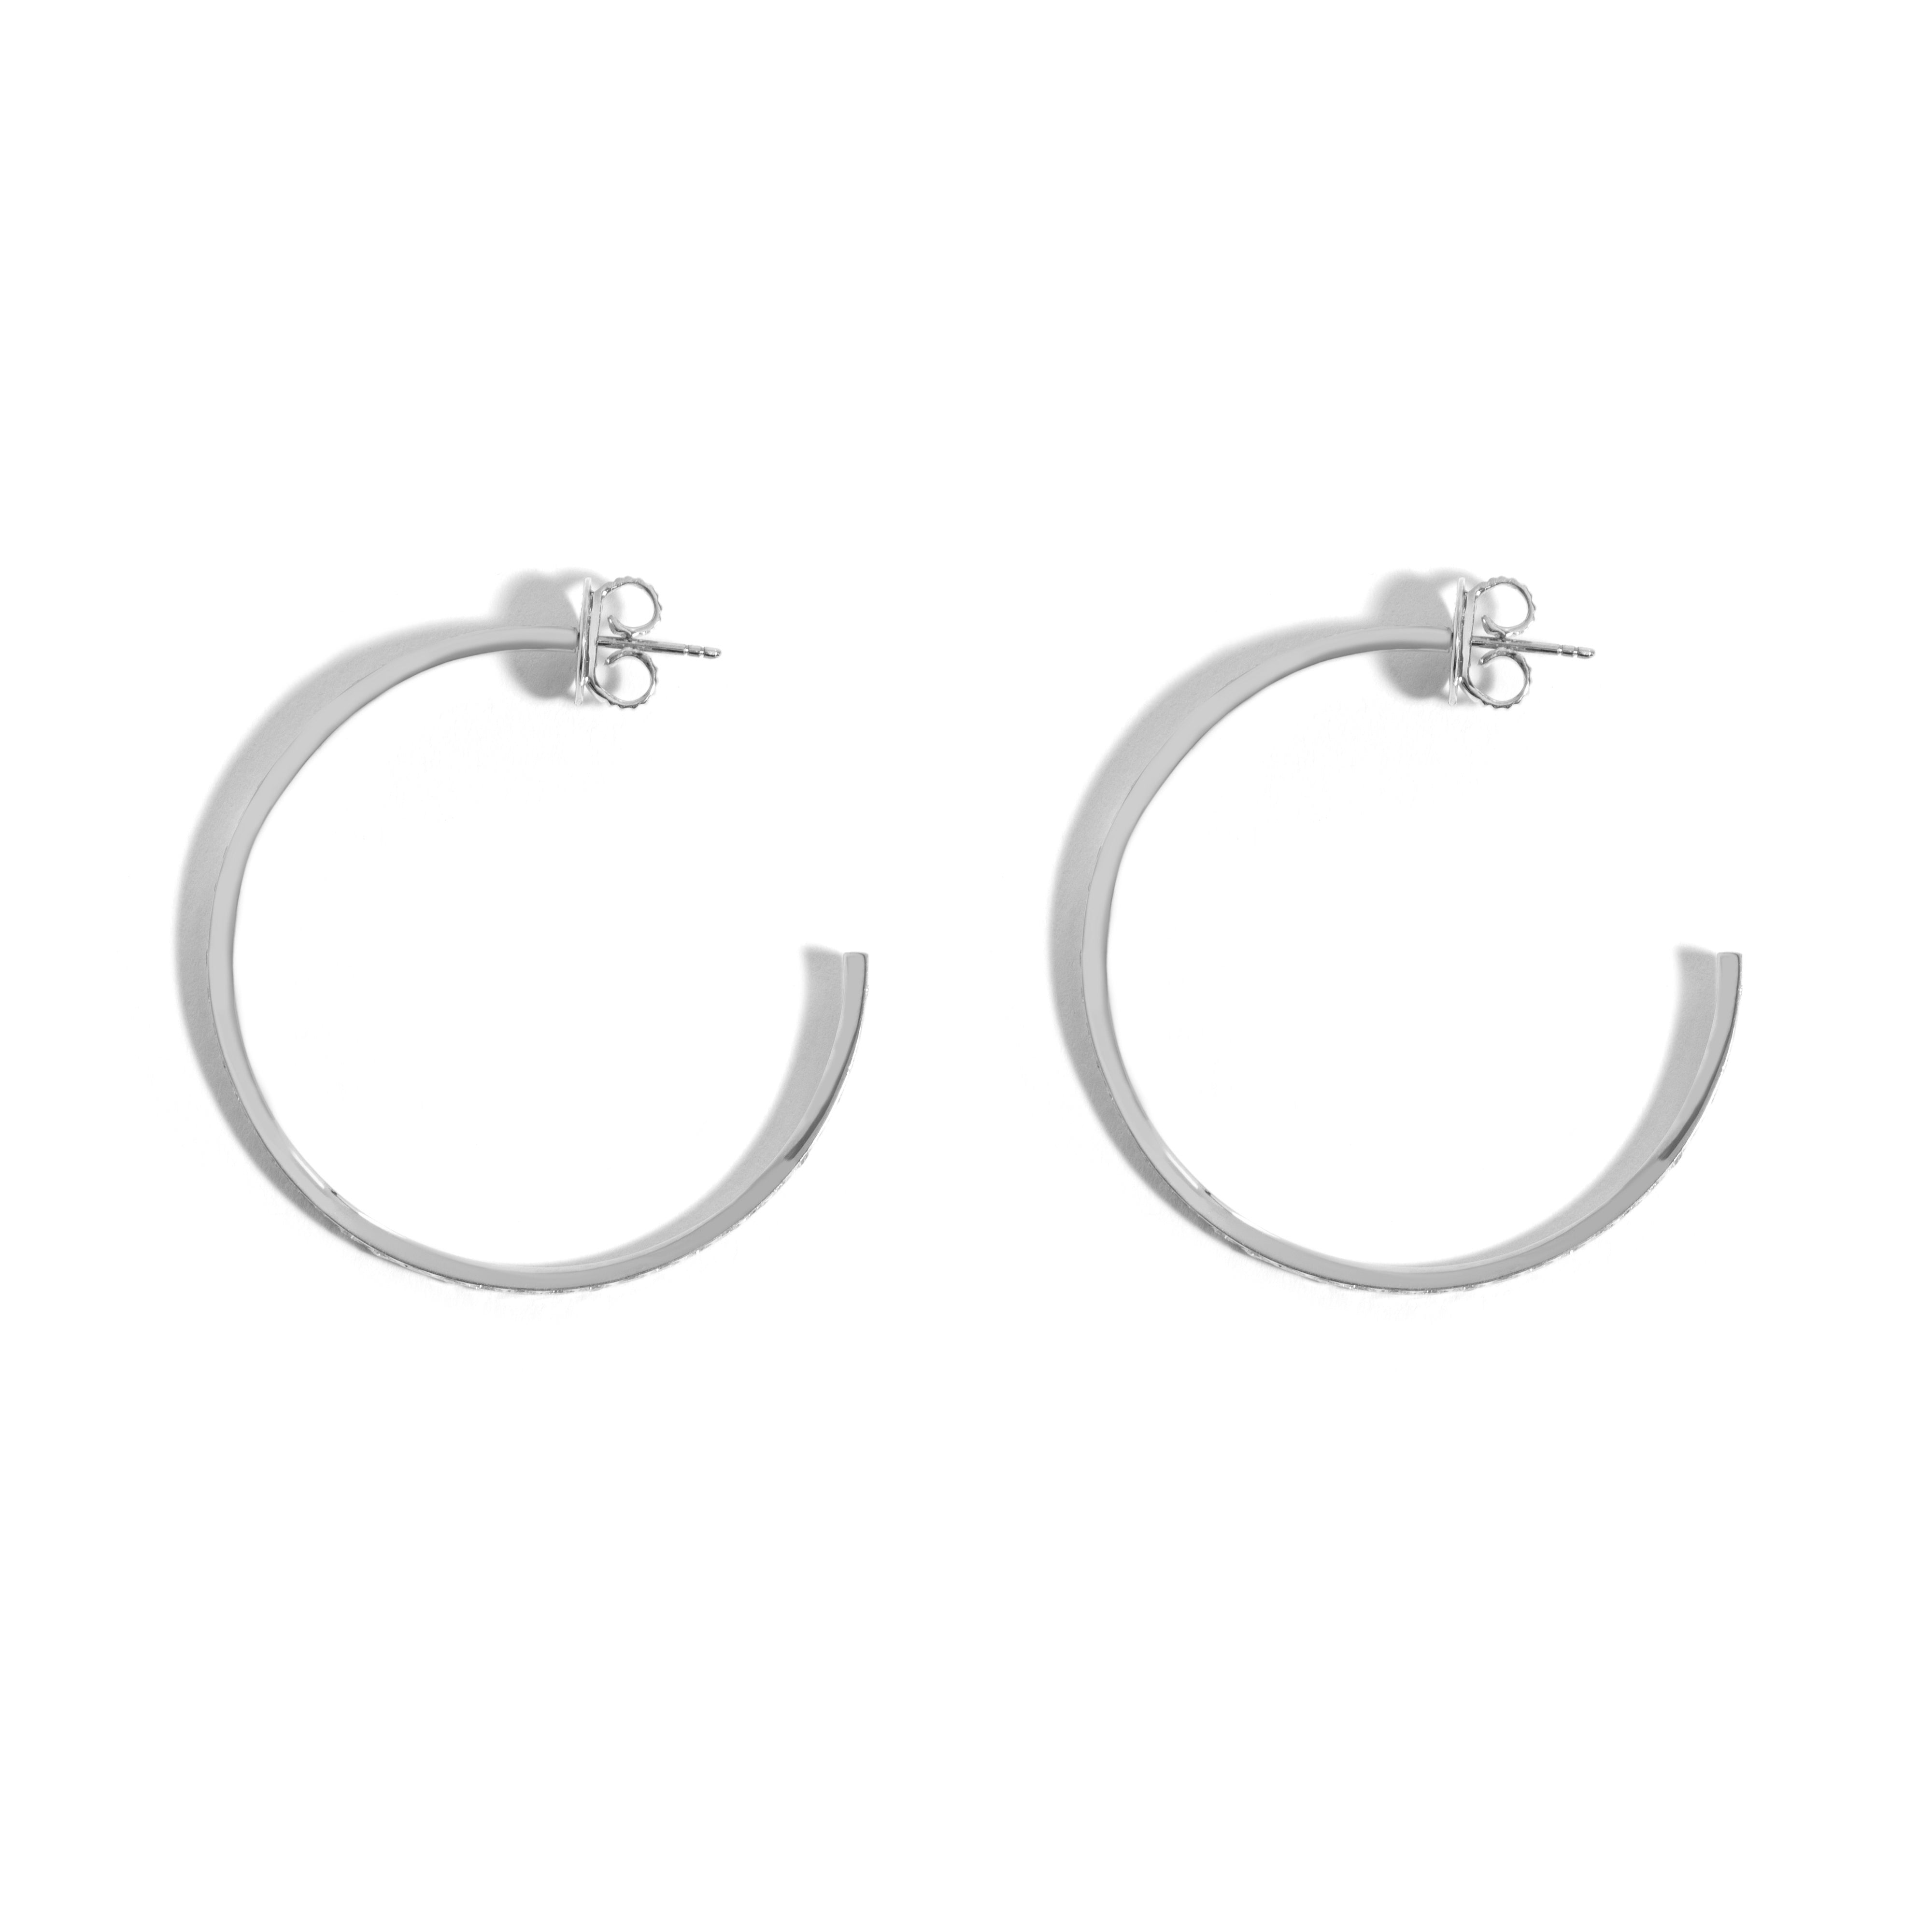 NEW VINTAGE POWER LARGE HOOP EARRING IN 18K WHITE GOLD WITH DIAMOND